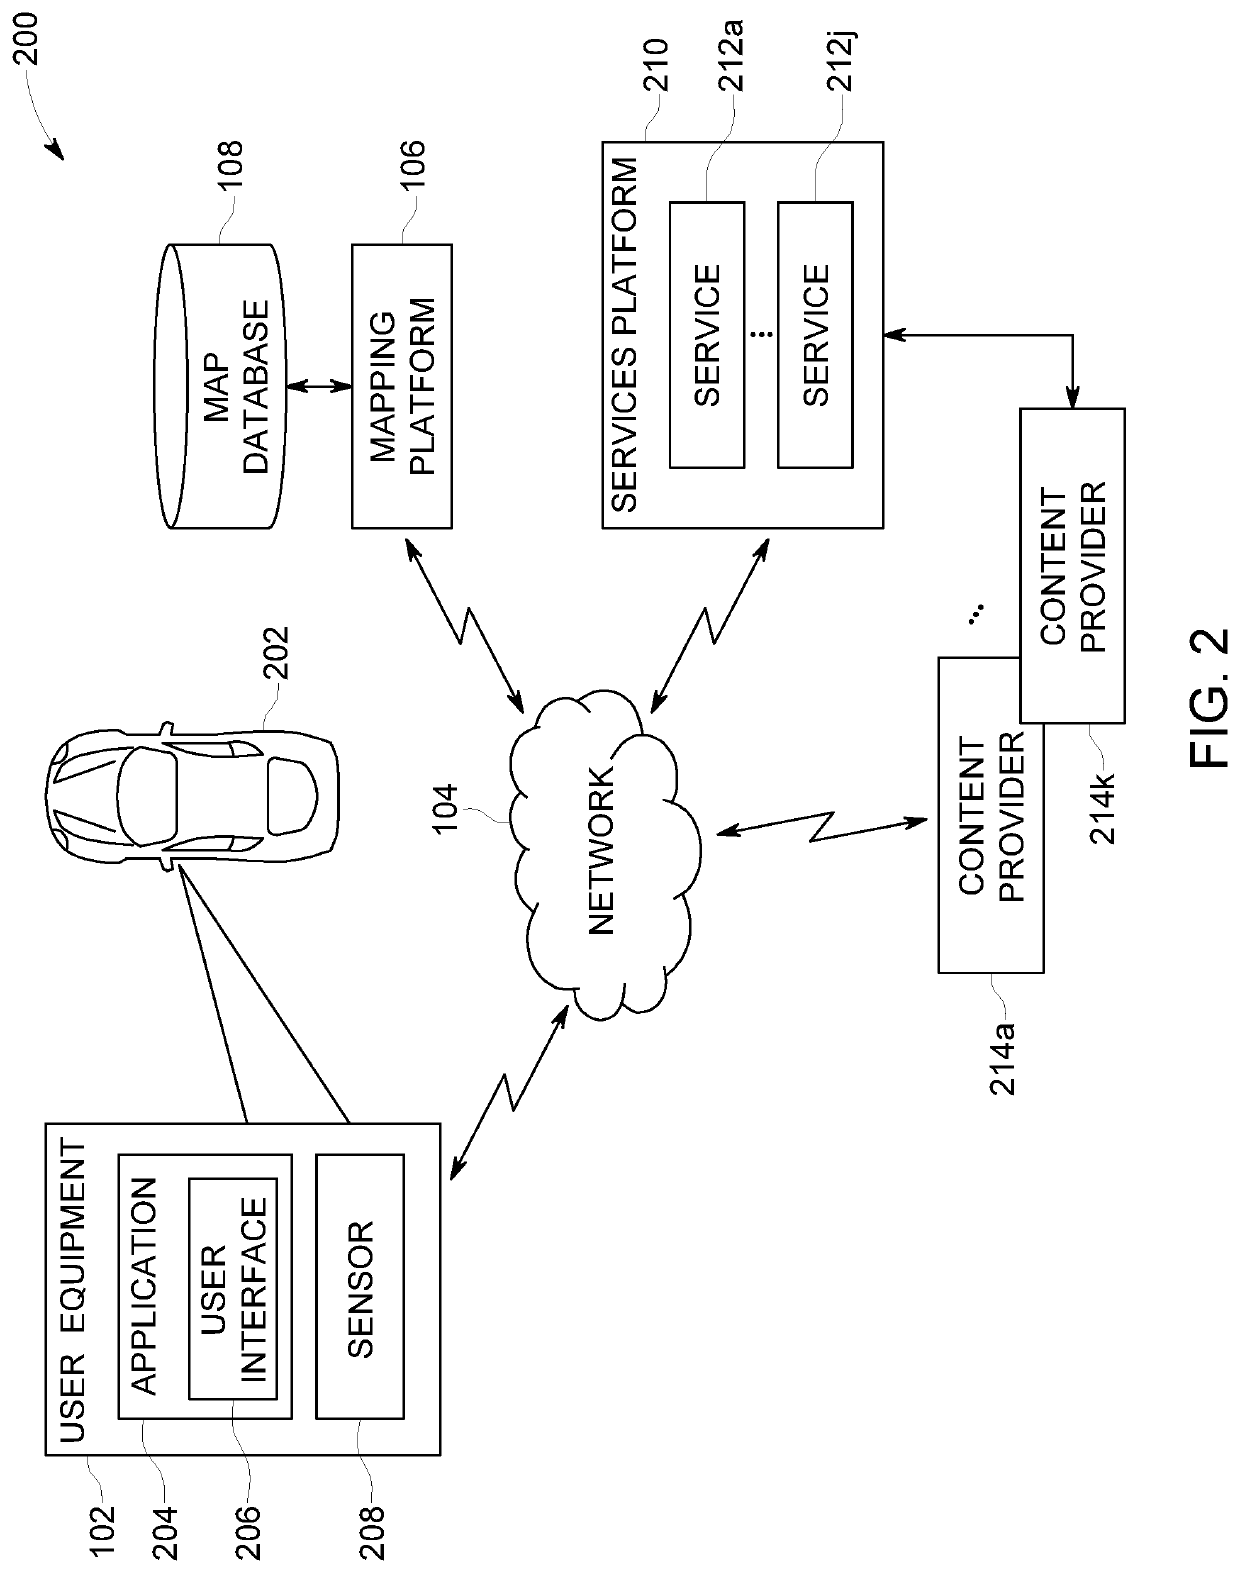 Methods and systems for providing recommendations for parking of vehicles